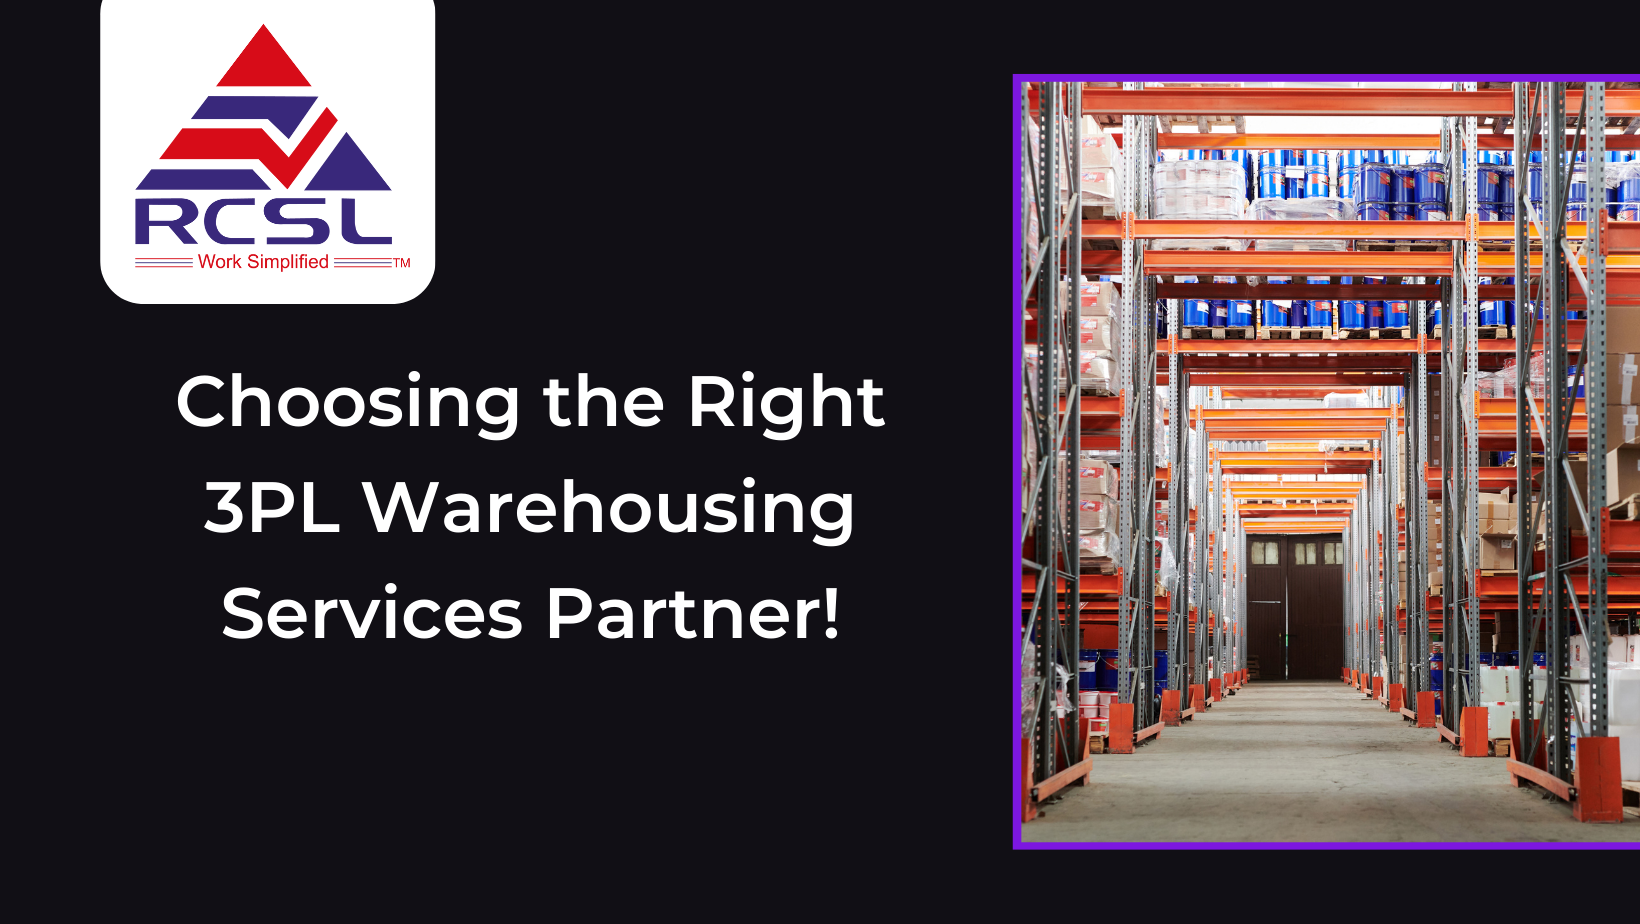 Choosing the Right 3PL Warehousing Services Partner